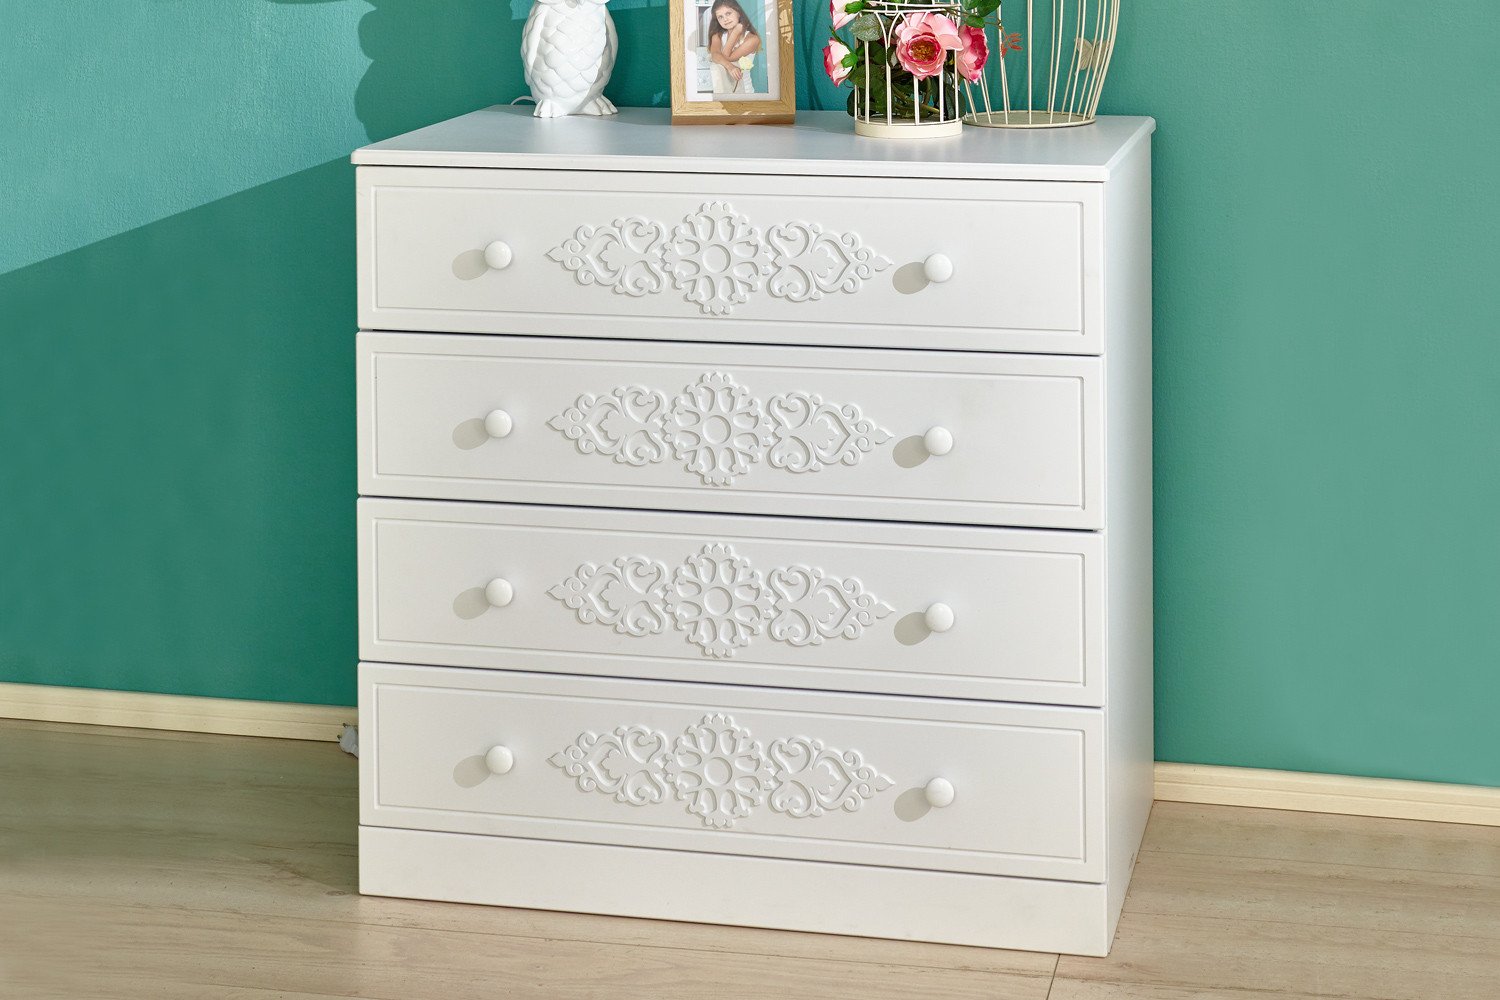 children's chest of drawers from mdf